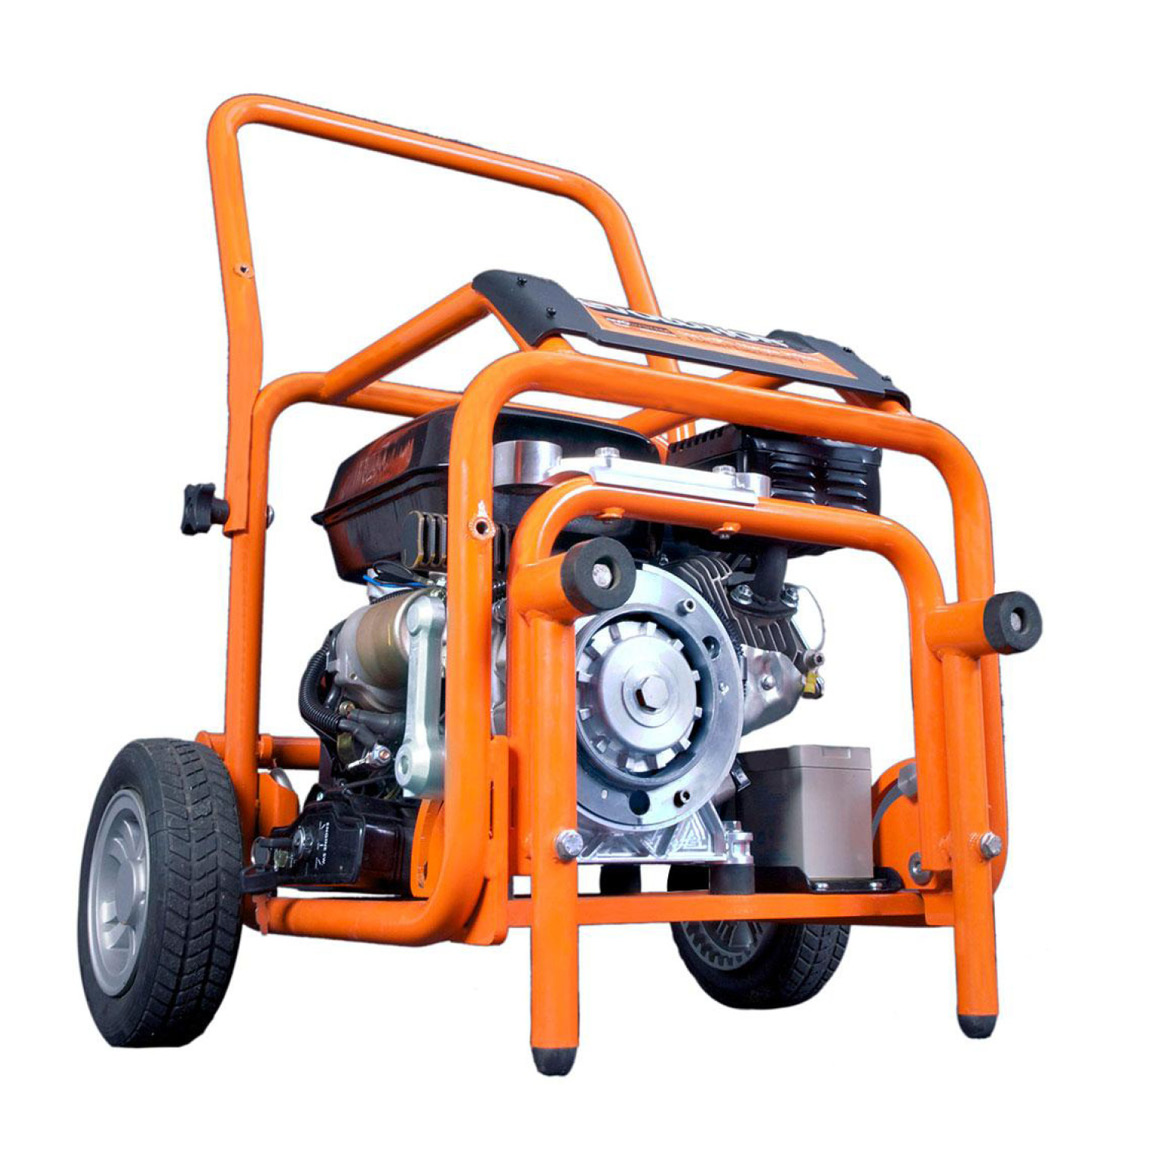 Evolution Evo-System 6.5HP (4-STROKE) Engine. Available with either water pump, generator or jet wash from Speedcrete, United Kingdom.